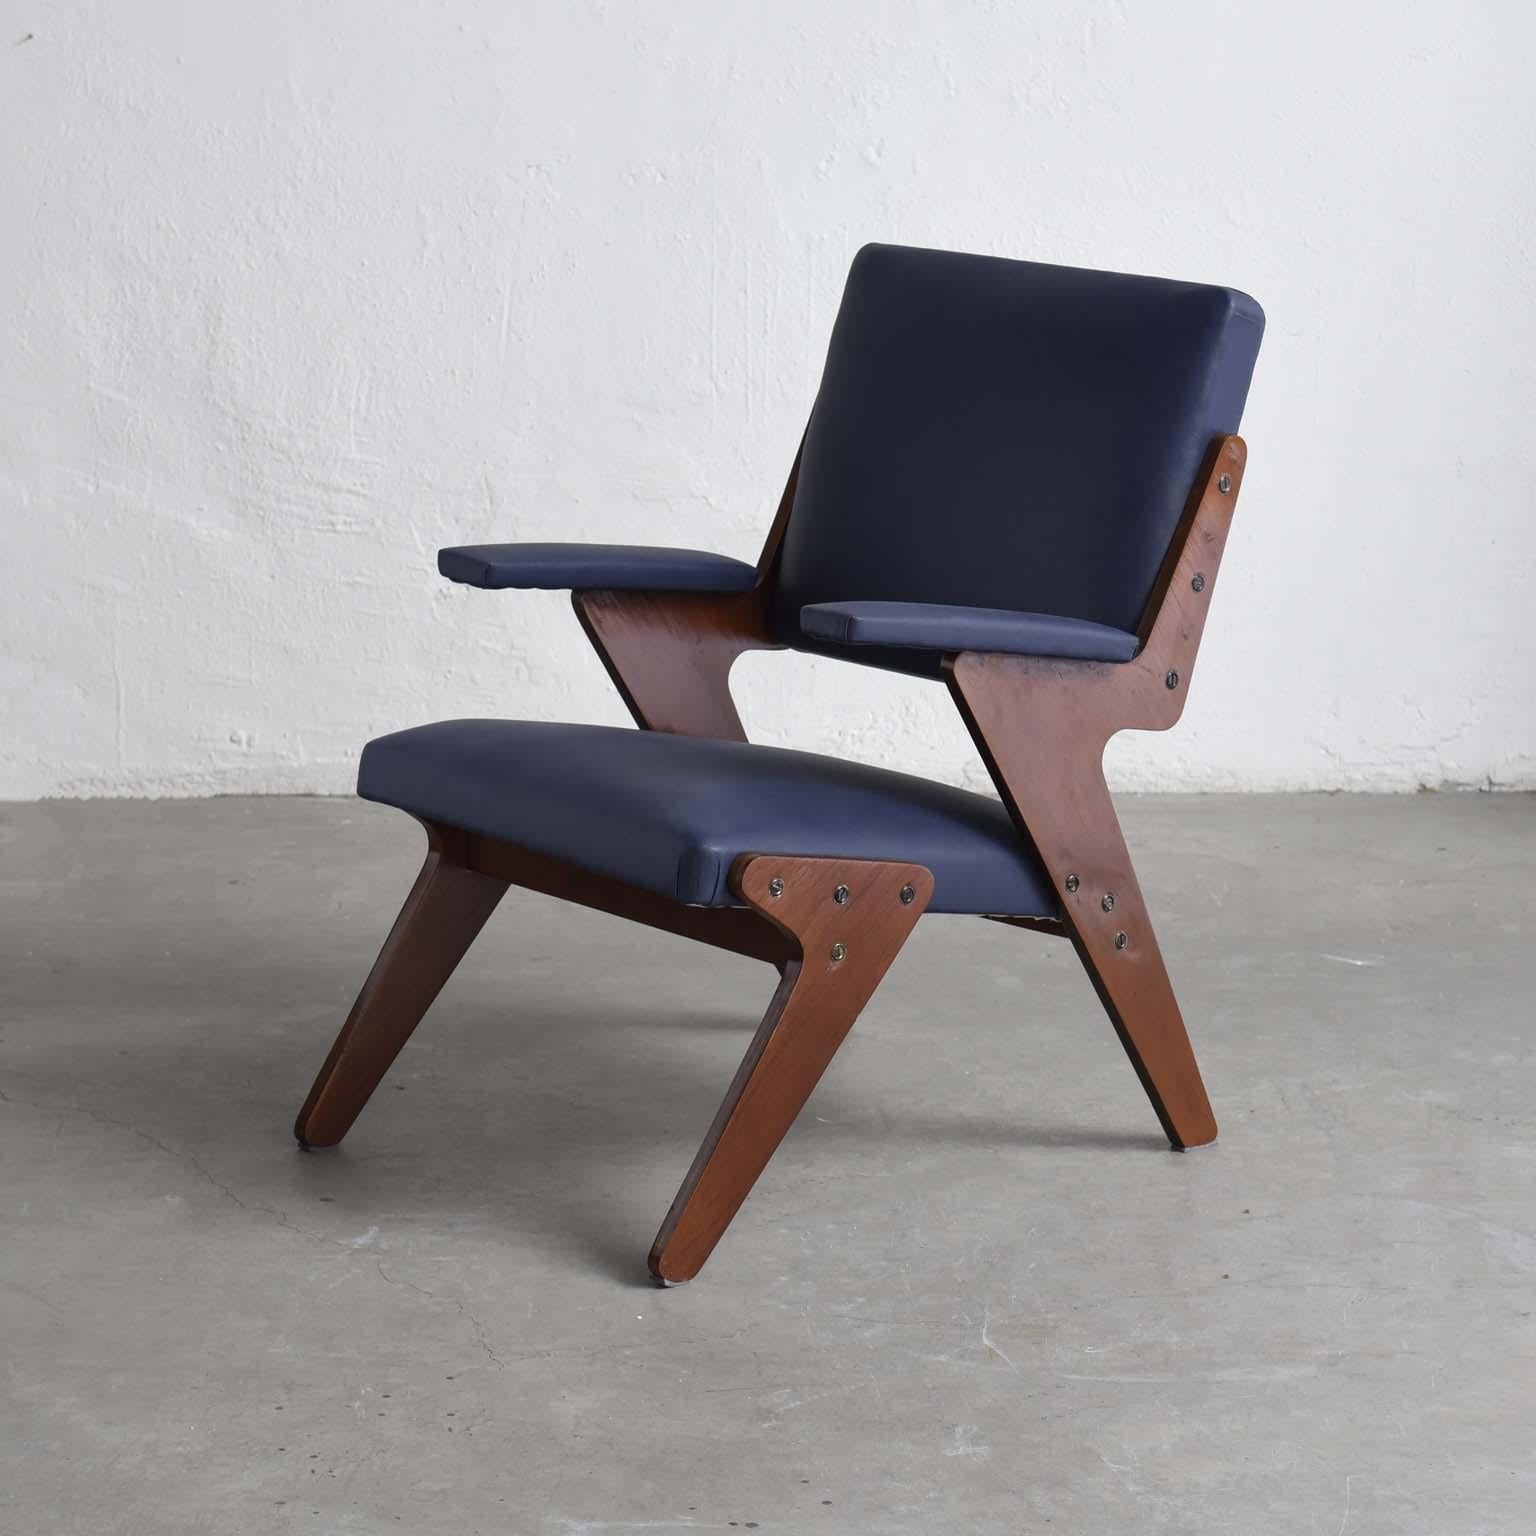 Attributed to Móveis Artísticos Z midcentury Brazilian armchair, 1950s.

Constructed of plywood, this comfortable armchair is attributed to Móveis Artísticos Z, a company opened by Zanine Caldas in 1948 and closed in 1961 after a fire.